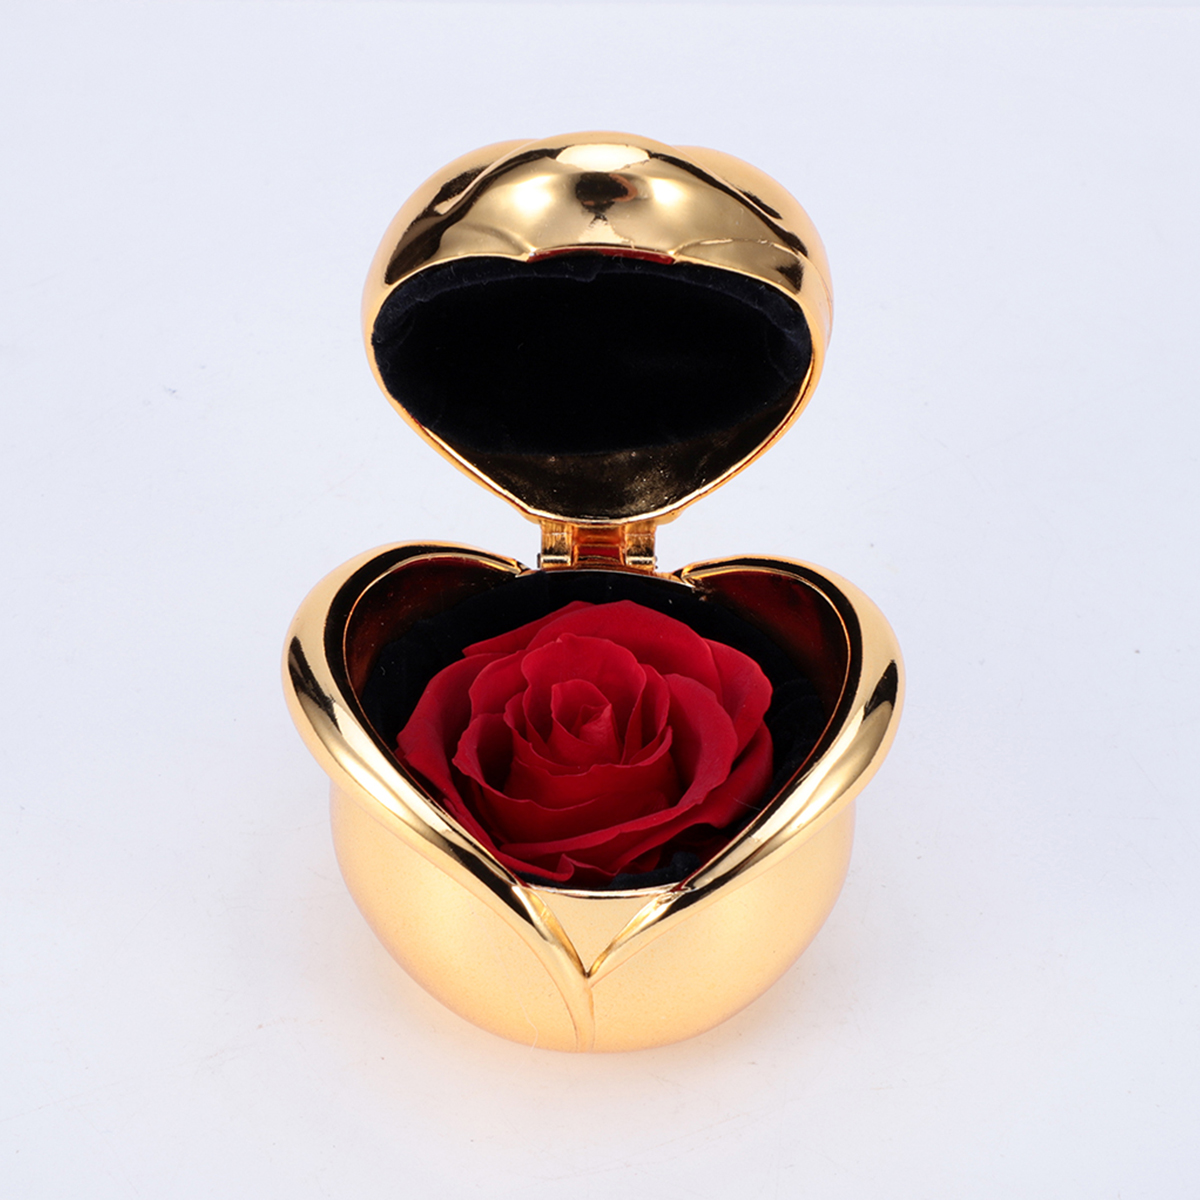 DYstyle Preserved Roses Flowers in Gift Box Romantic Gifts for Thanks Giving Female Valentine's Day - image 2 of 4